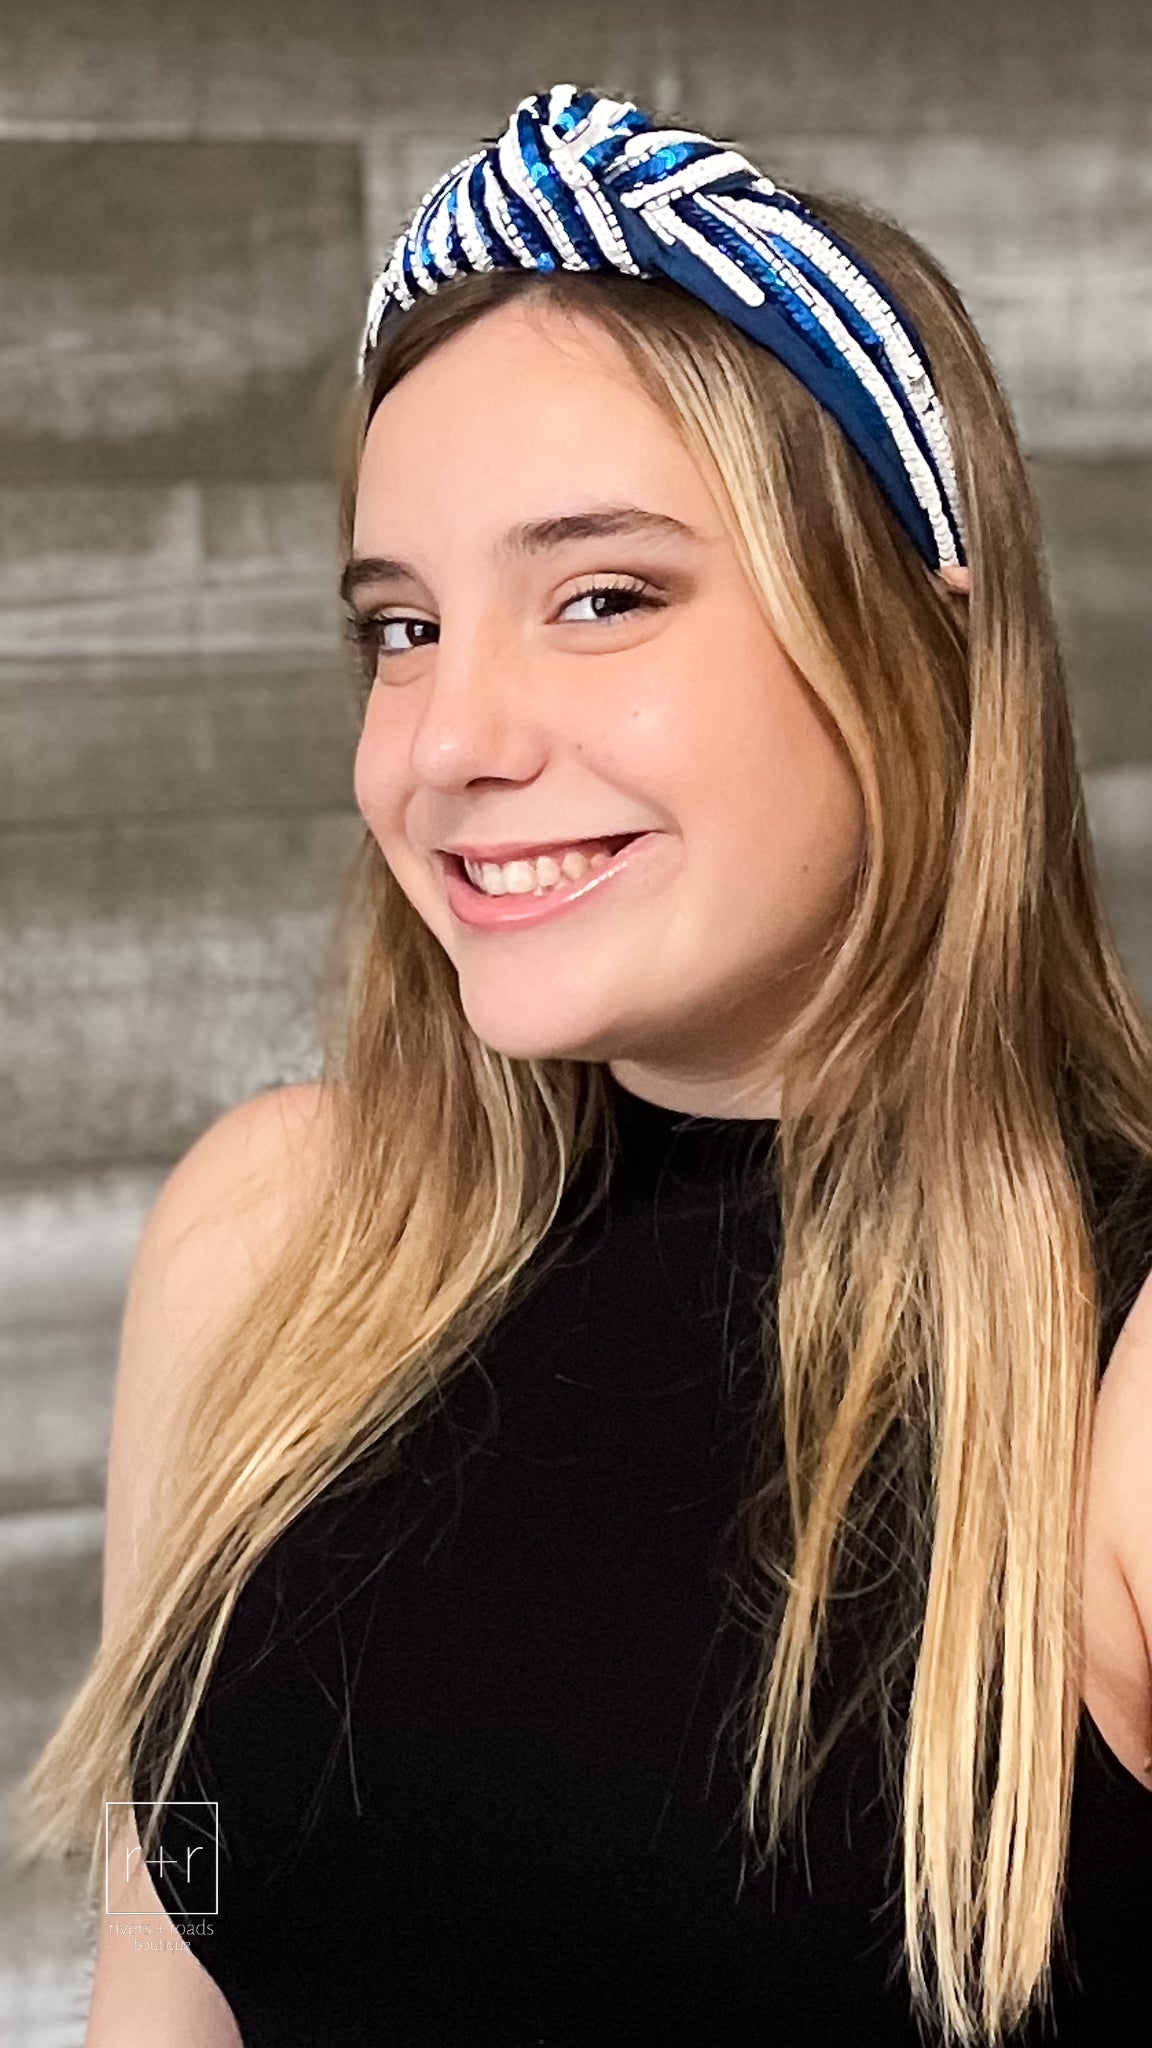 blue and white sequin gameday fashion headband